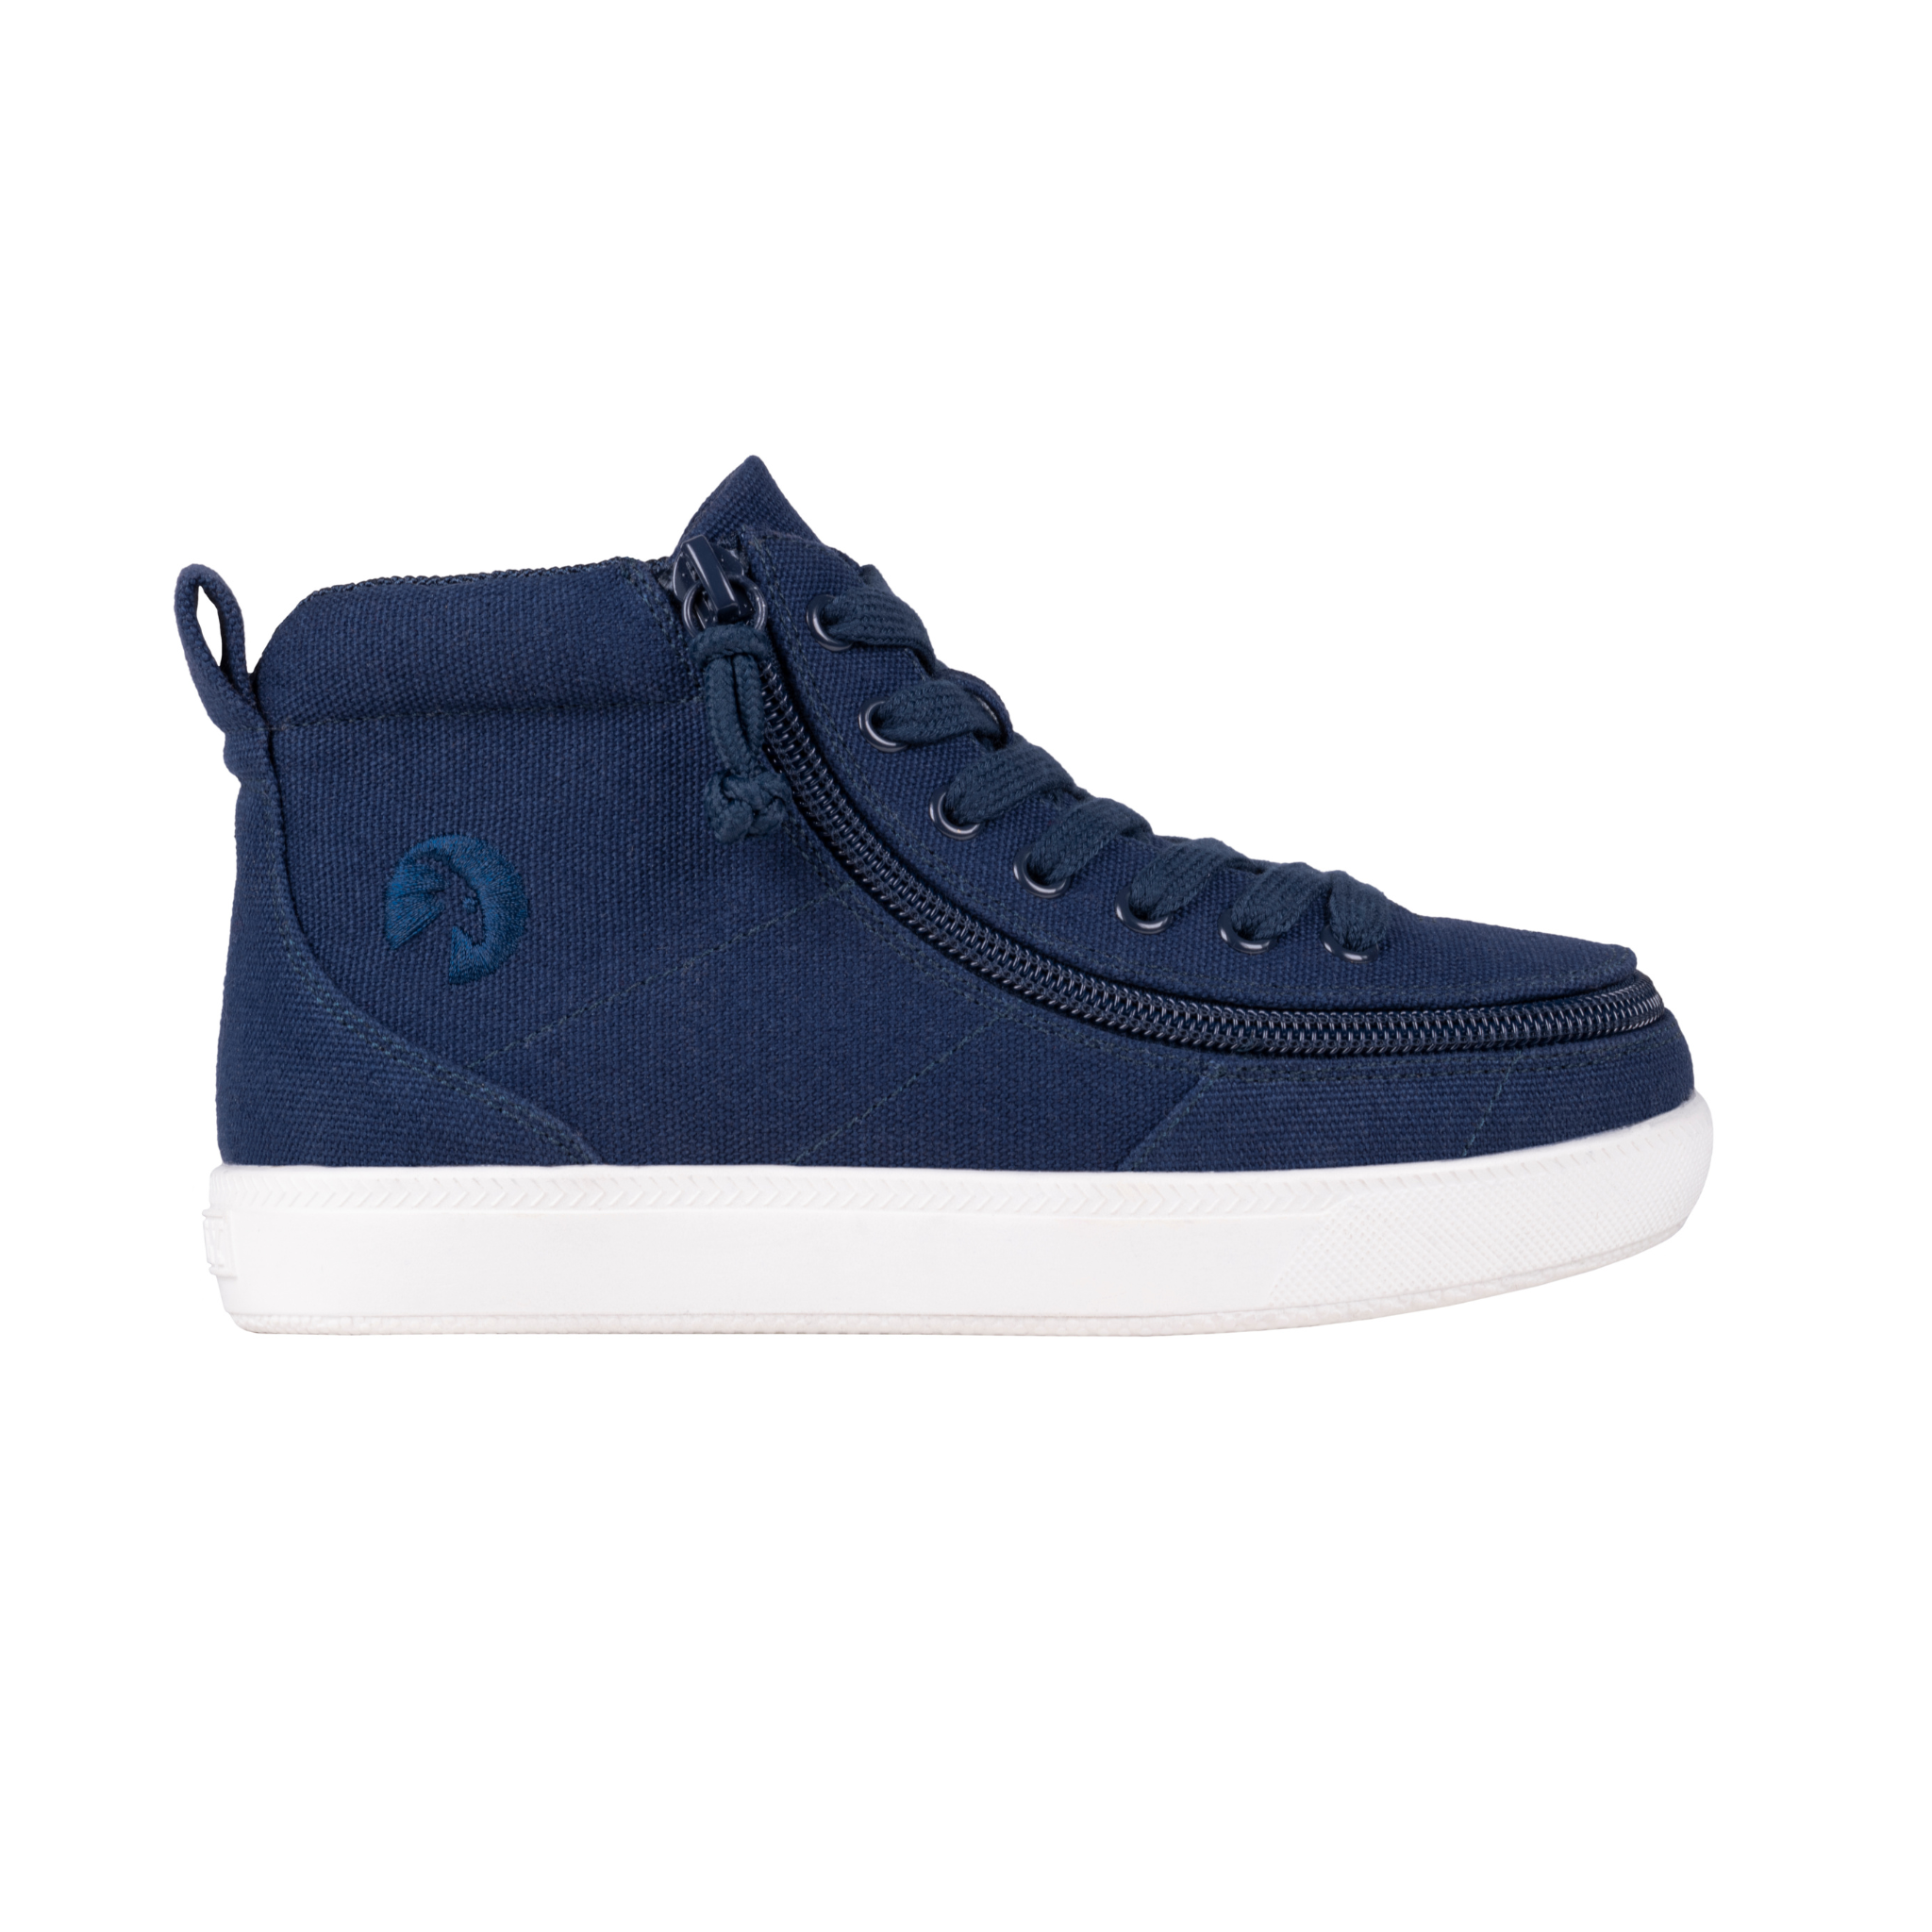 Billy Footwear (Kids) D|R II Fit - High Top Navy Canvas Shoes